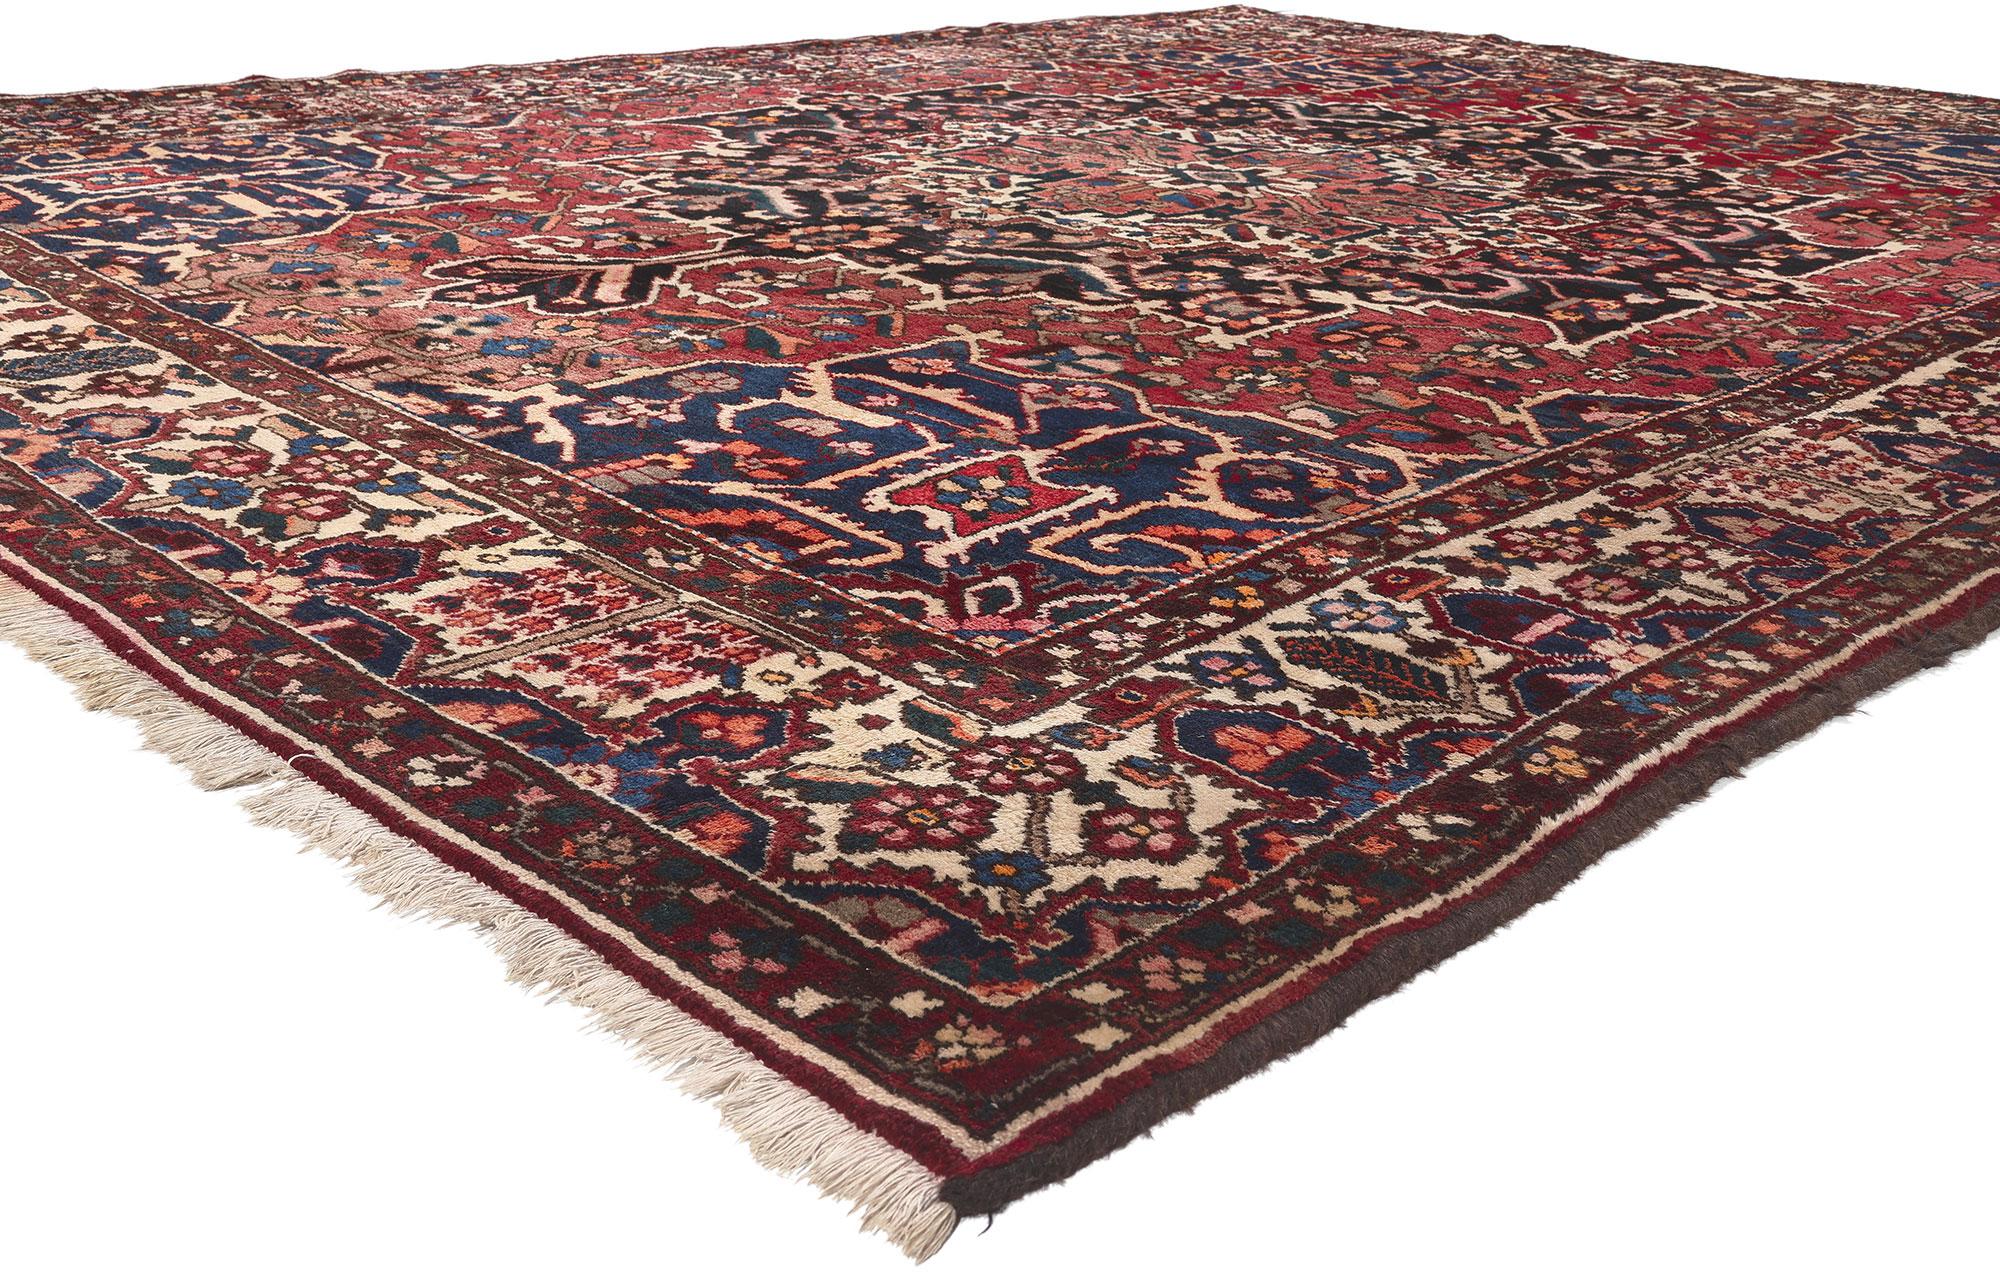 78570 Antique Persian Bakhtiari Rug, 09'10 x 12'10. Bakhtiari rugs are made by the Bakhtiari tribe, who live in the Chahar Mahaal and Bakhtiari provinces of Iran. The Bakhtiari are one of Persia's oldest nomadic tribes and have been weaving rugs for